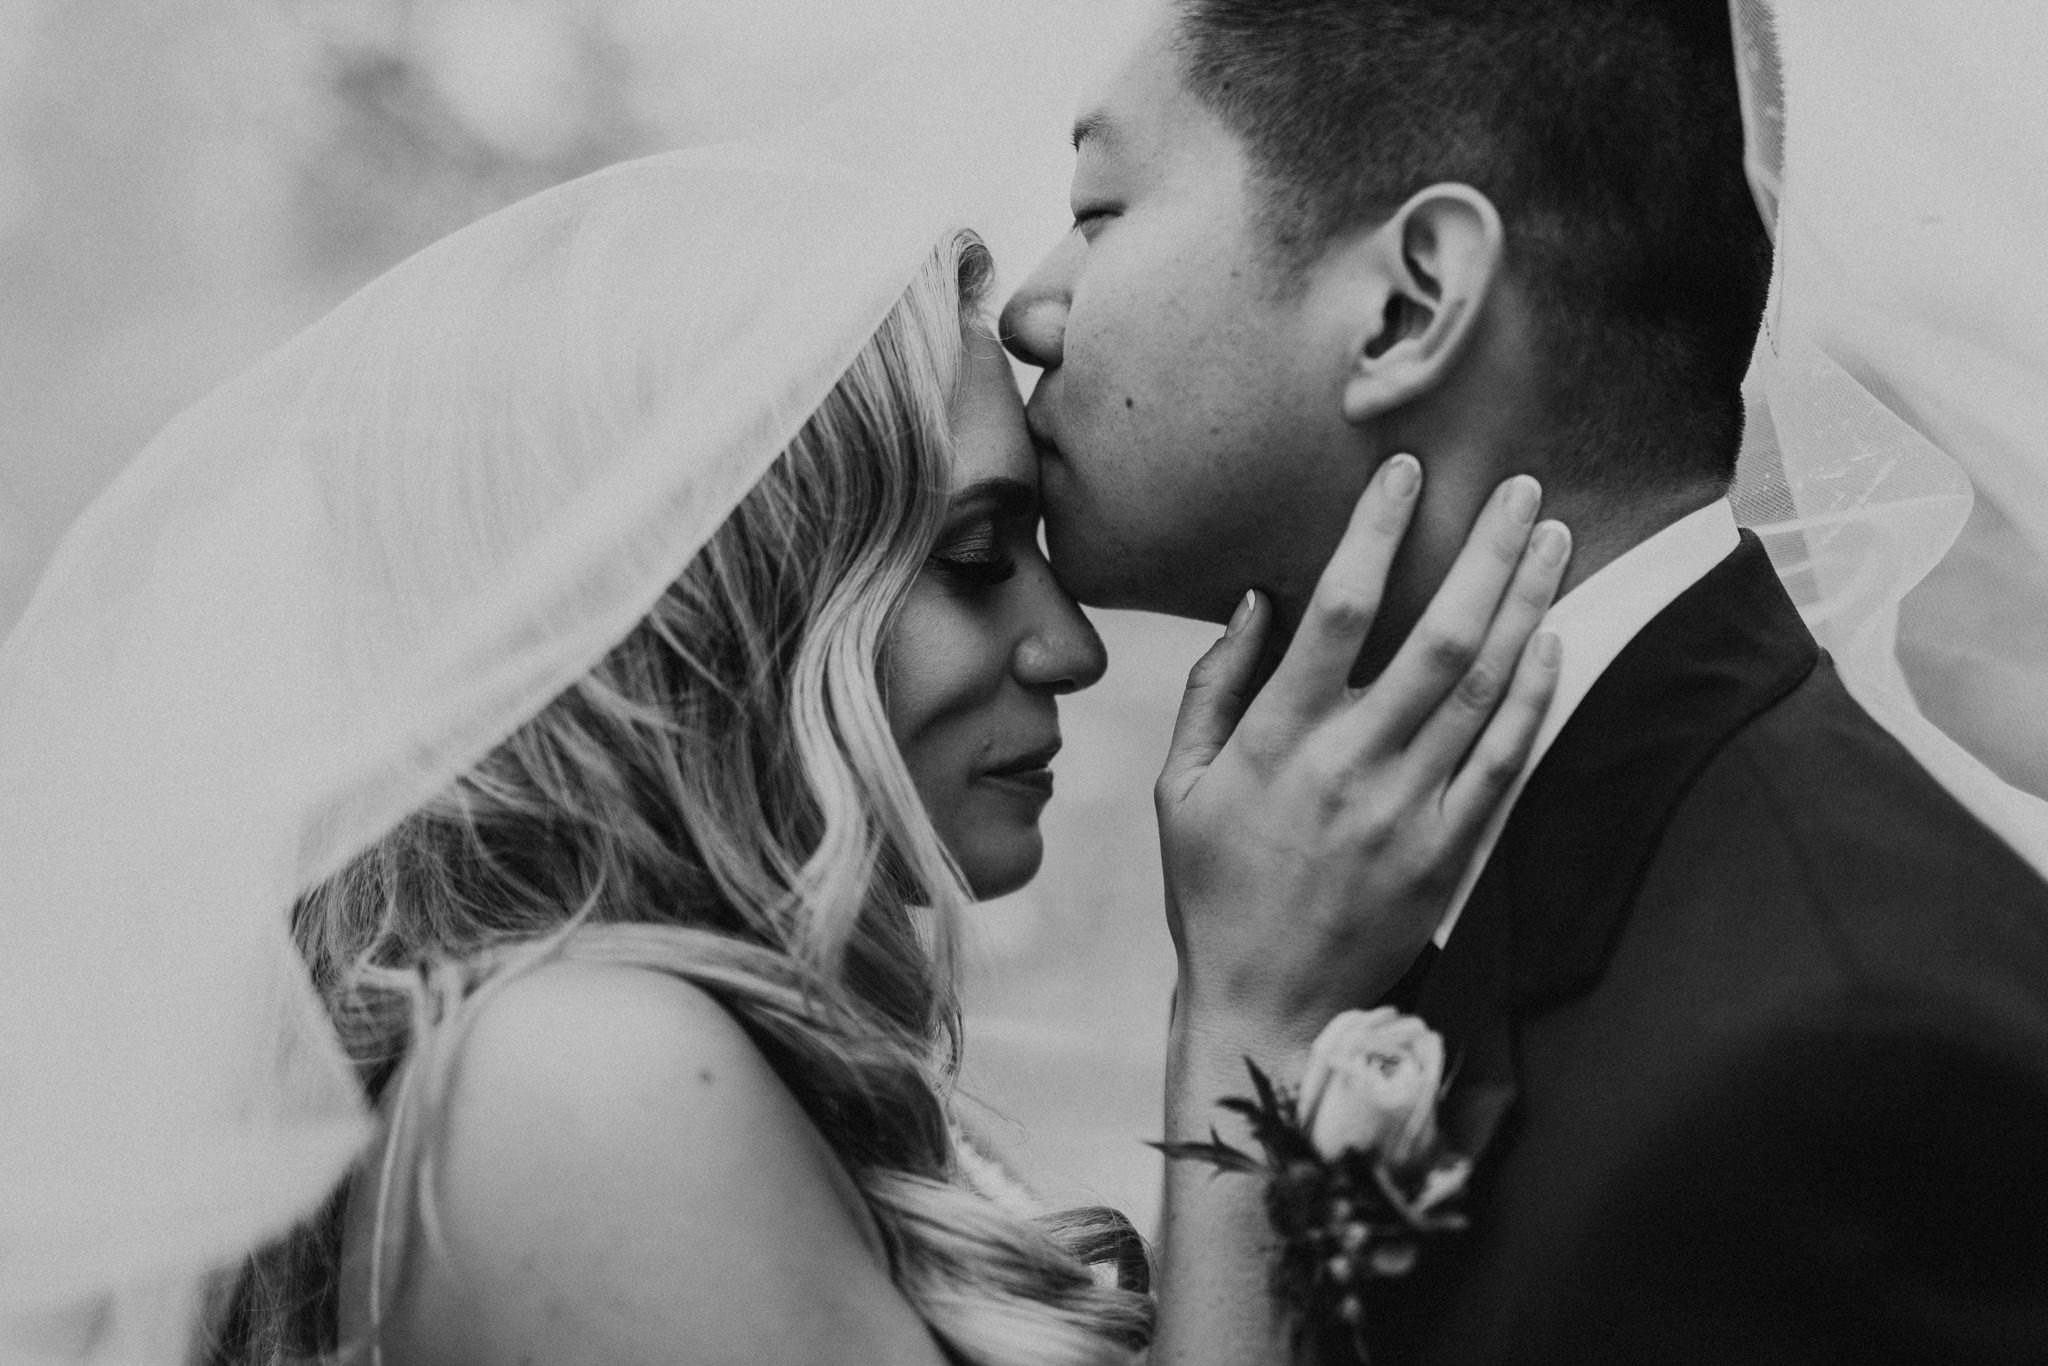 classic black and white wedding photography